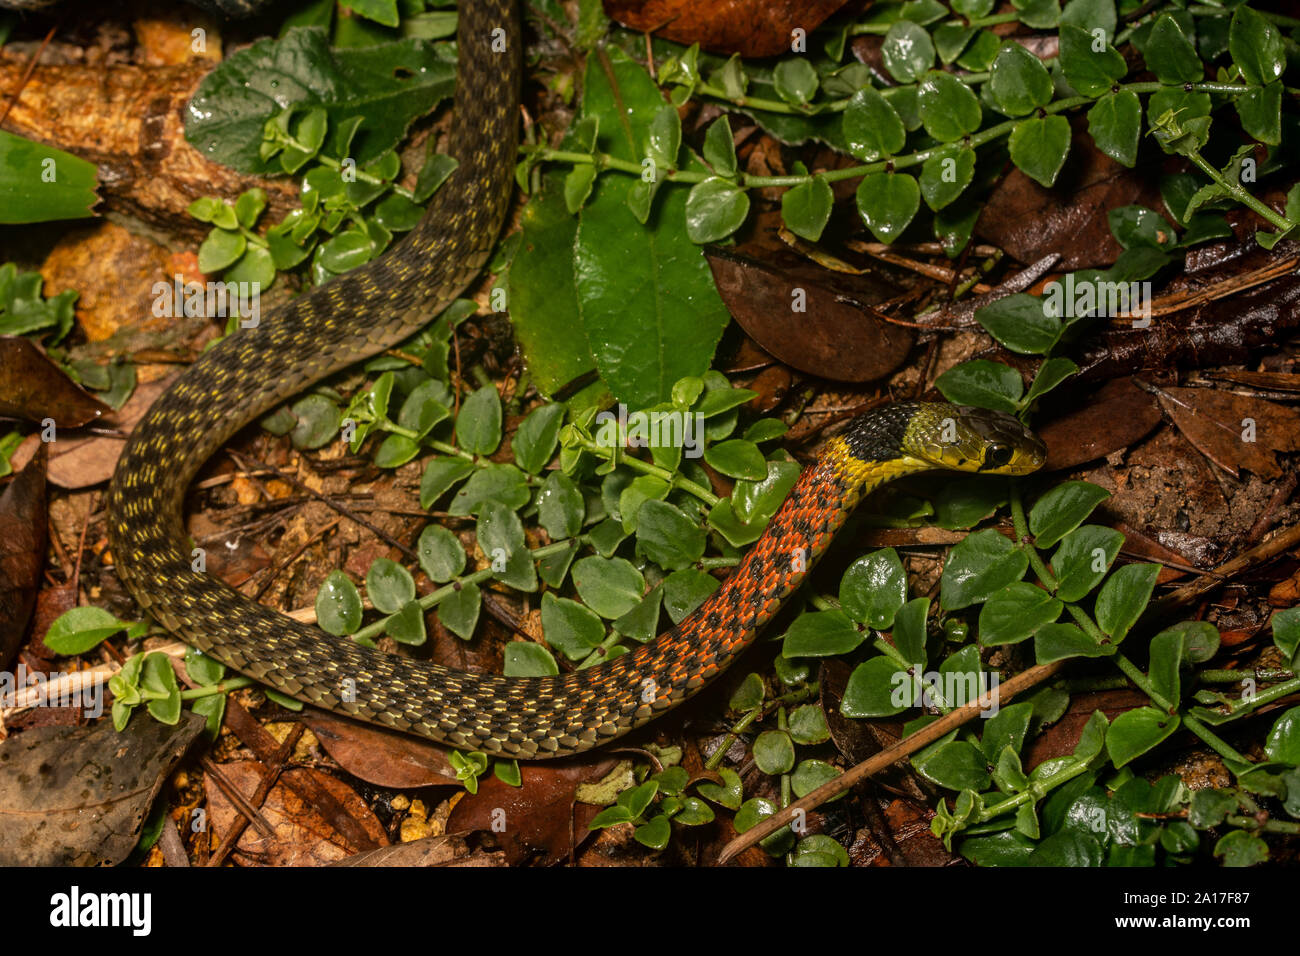 Red-necked (Rhabdophis subminiatus subminiatus) from Hong Kong Stock Photo - Alamy